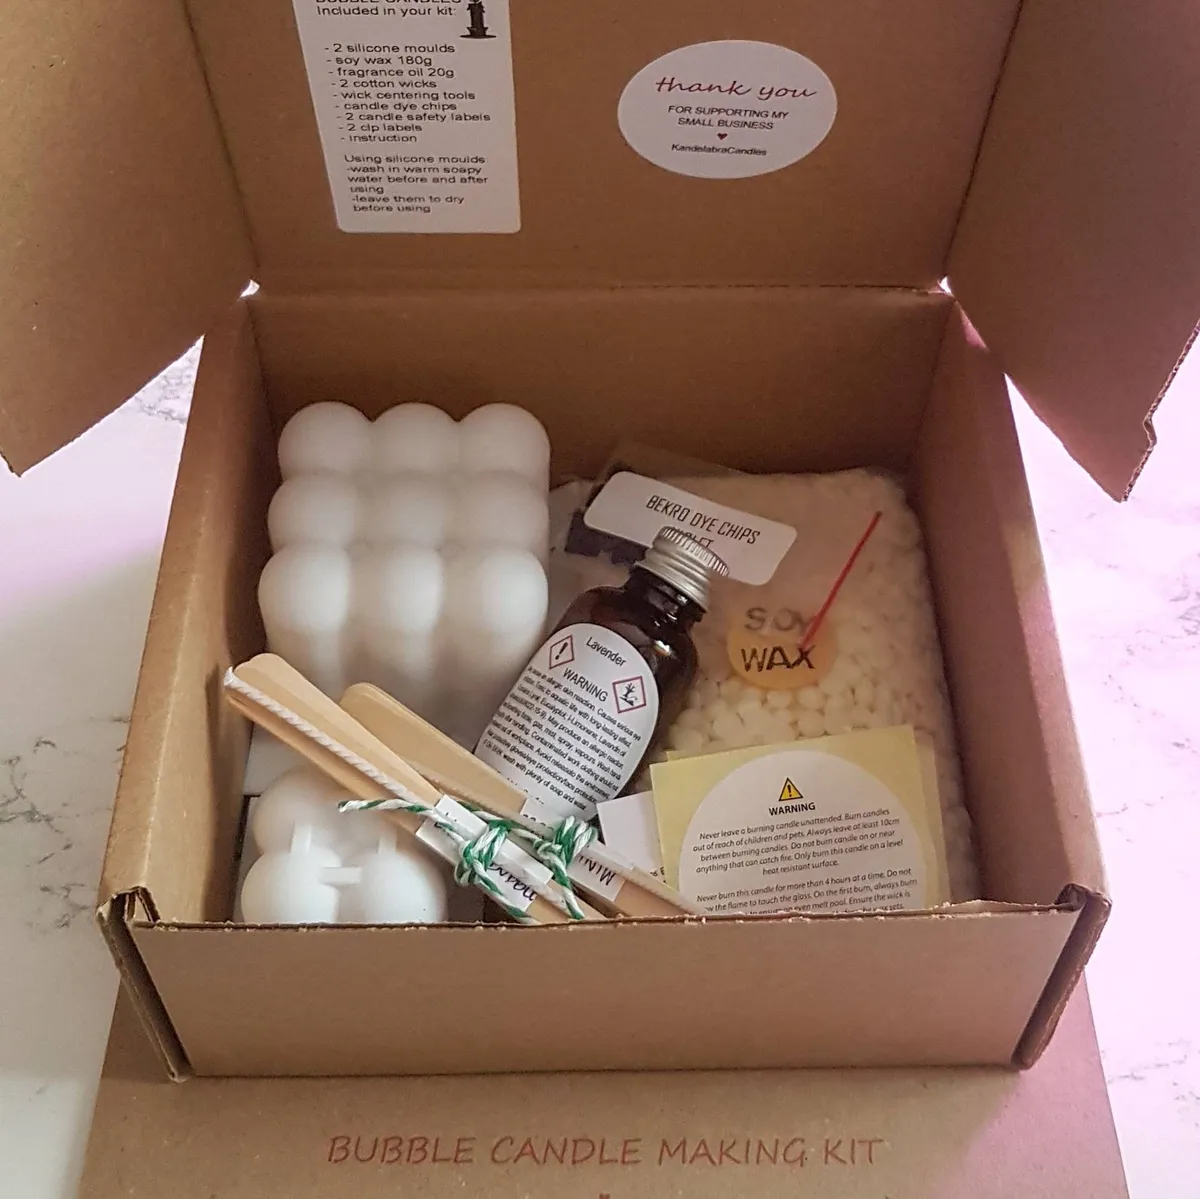 All-inclusive kit, to learn how to make candles. Great evening.